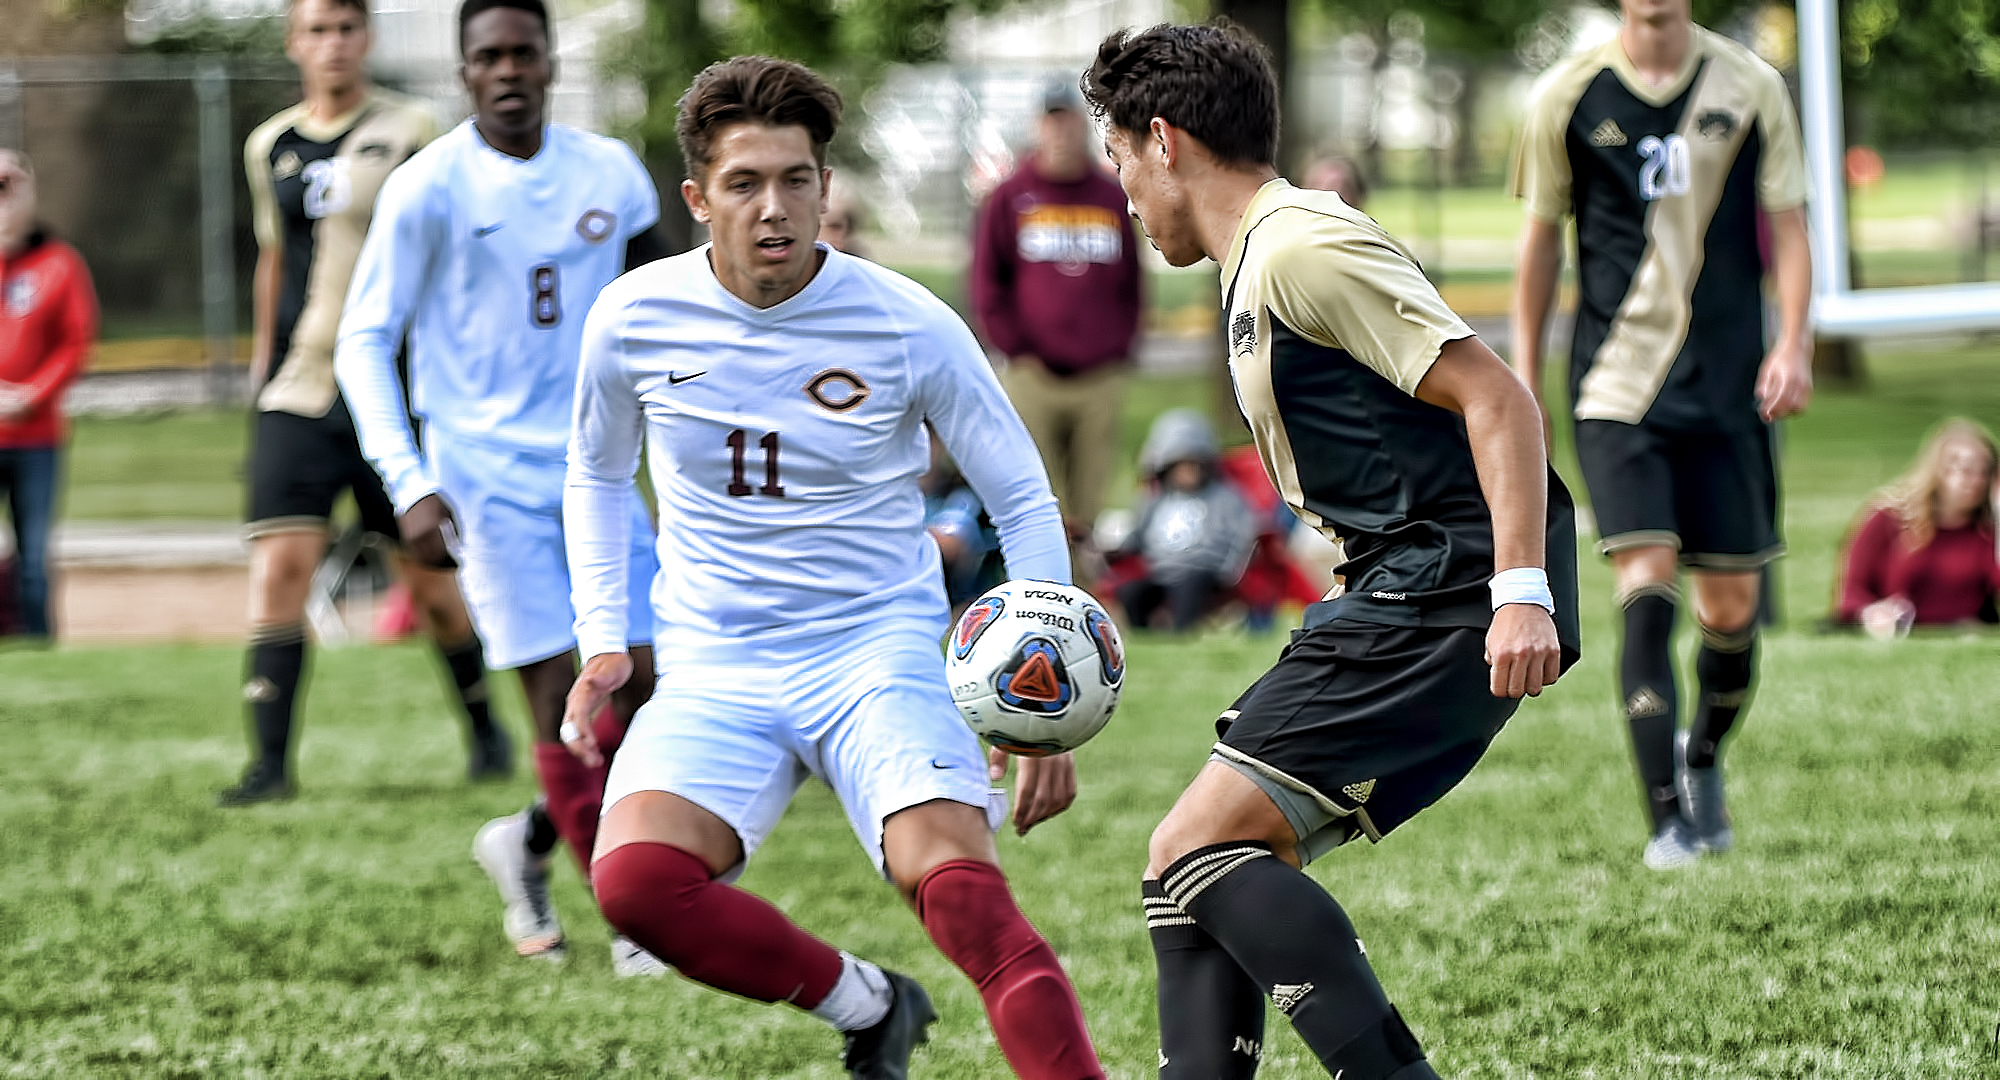 Sophomore Nate Weaver scored the game-tying goal in the second half in the Cobbers' 1-1 2OT tie at Wis.-Superior.